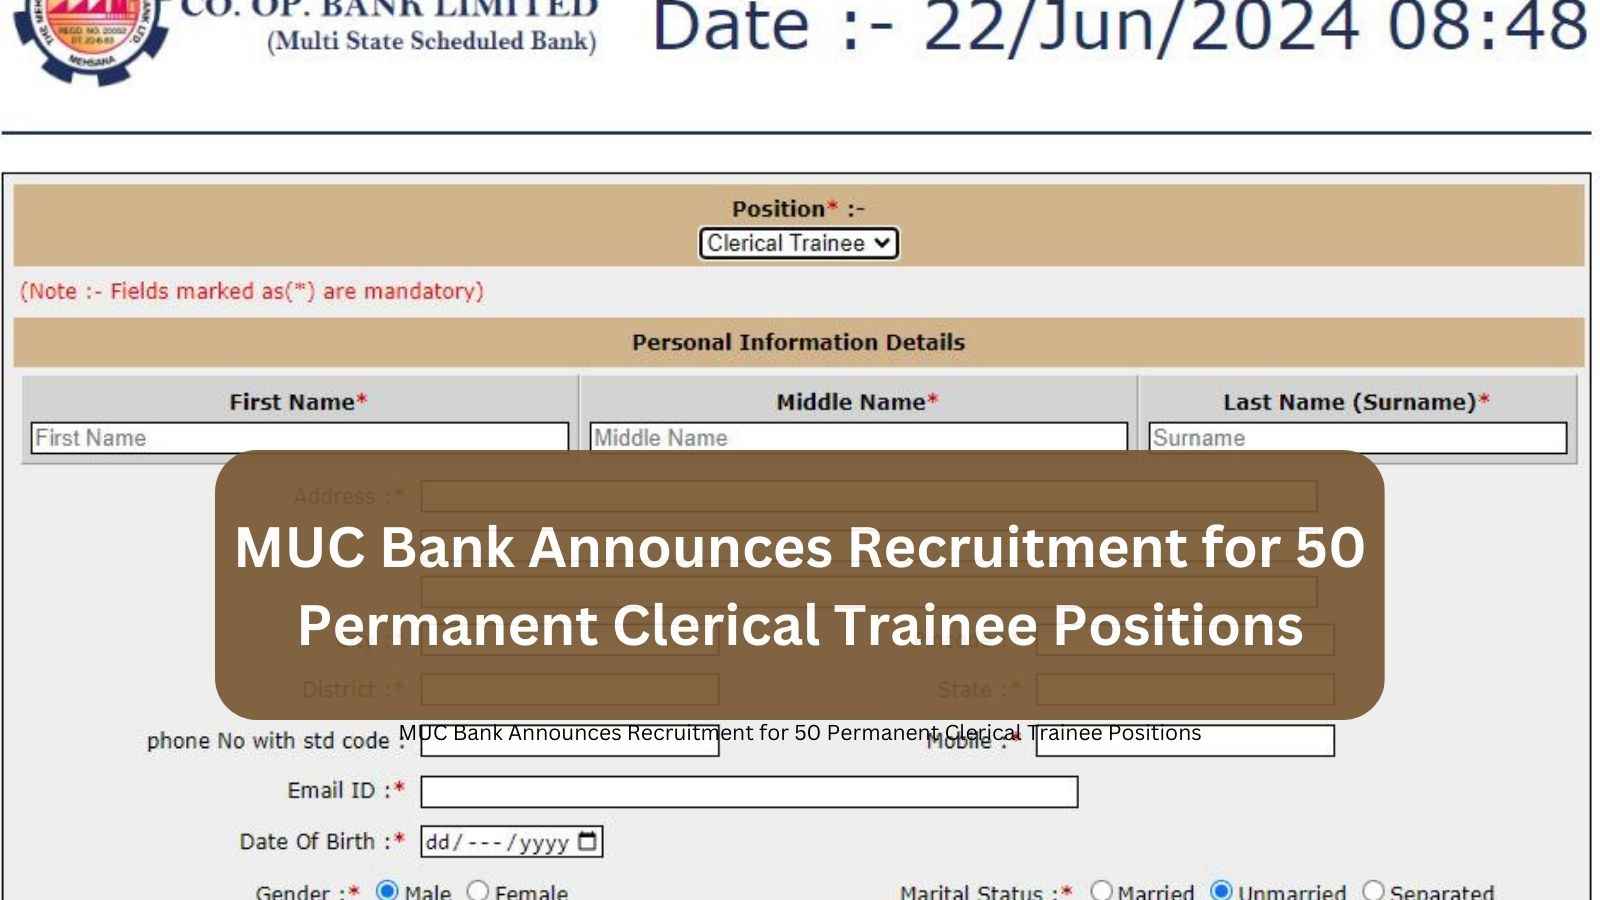 MUC Bank Recruitment Out For 50 permanent posts for clerical trainees.